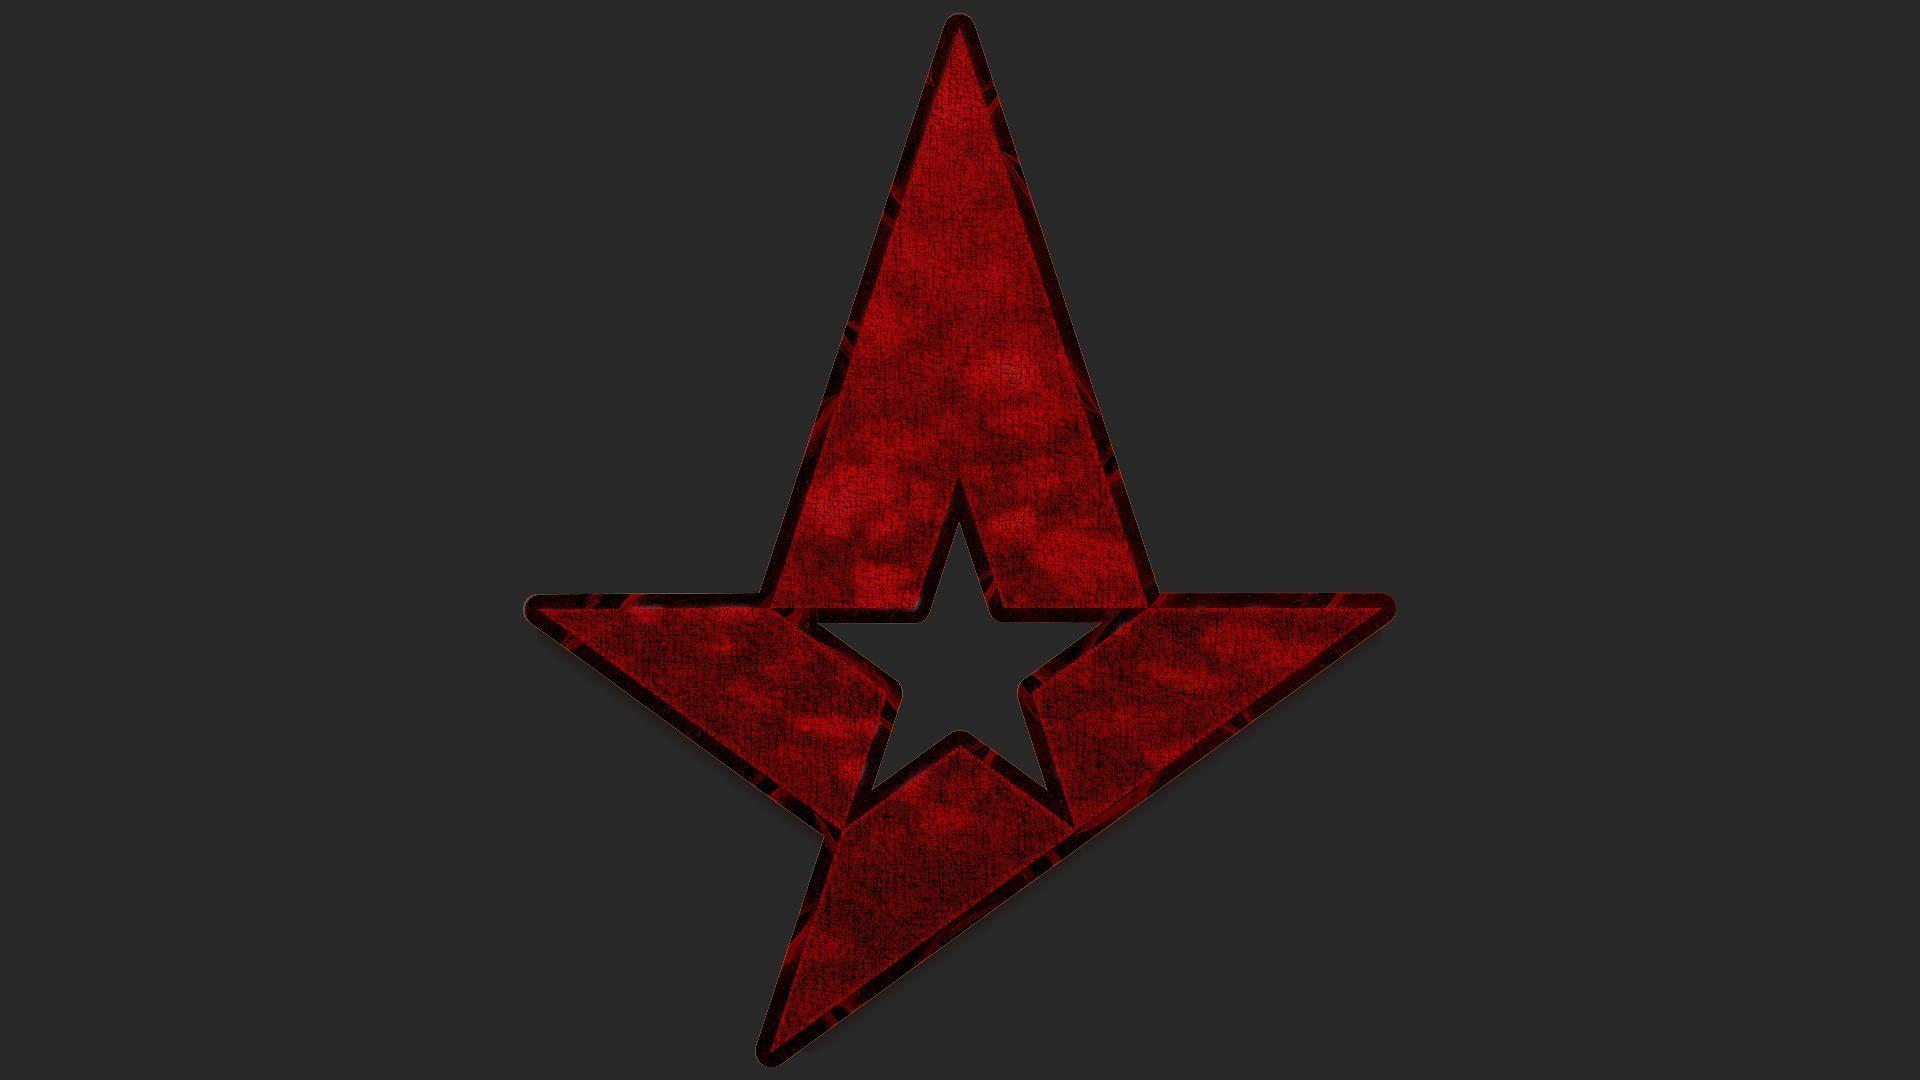 Astralis and c9 wallpaper I made (only 1920x1080) Need #iPhone S